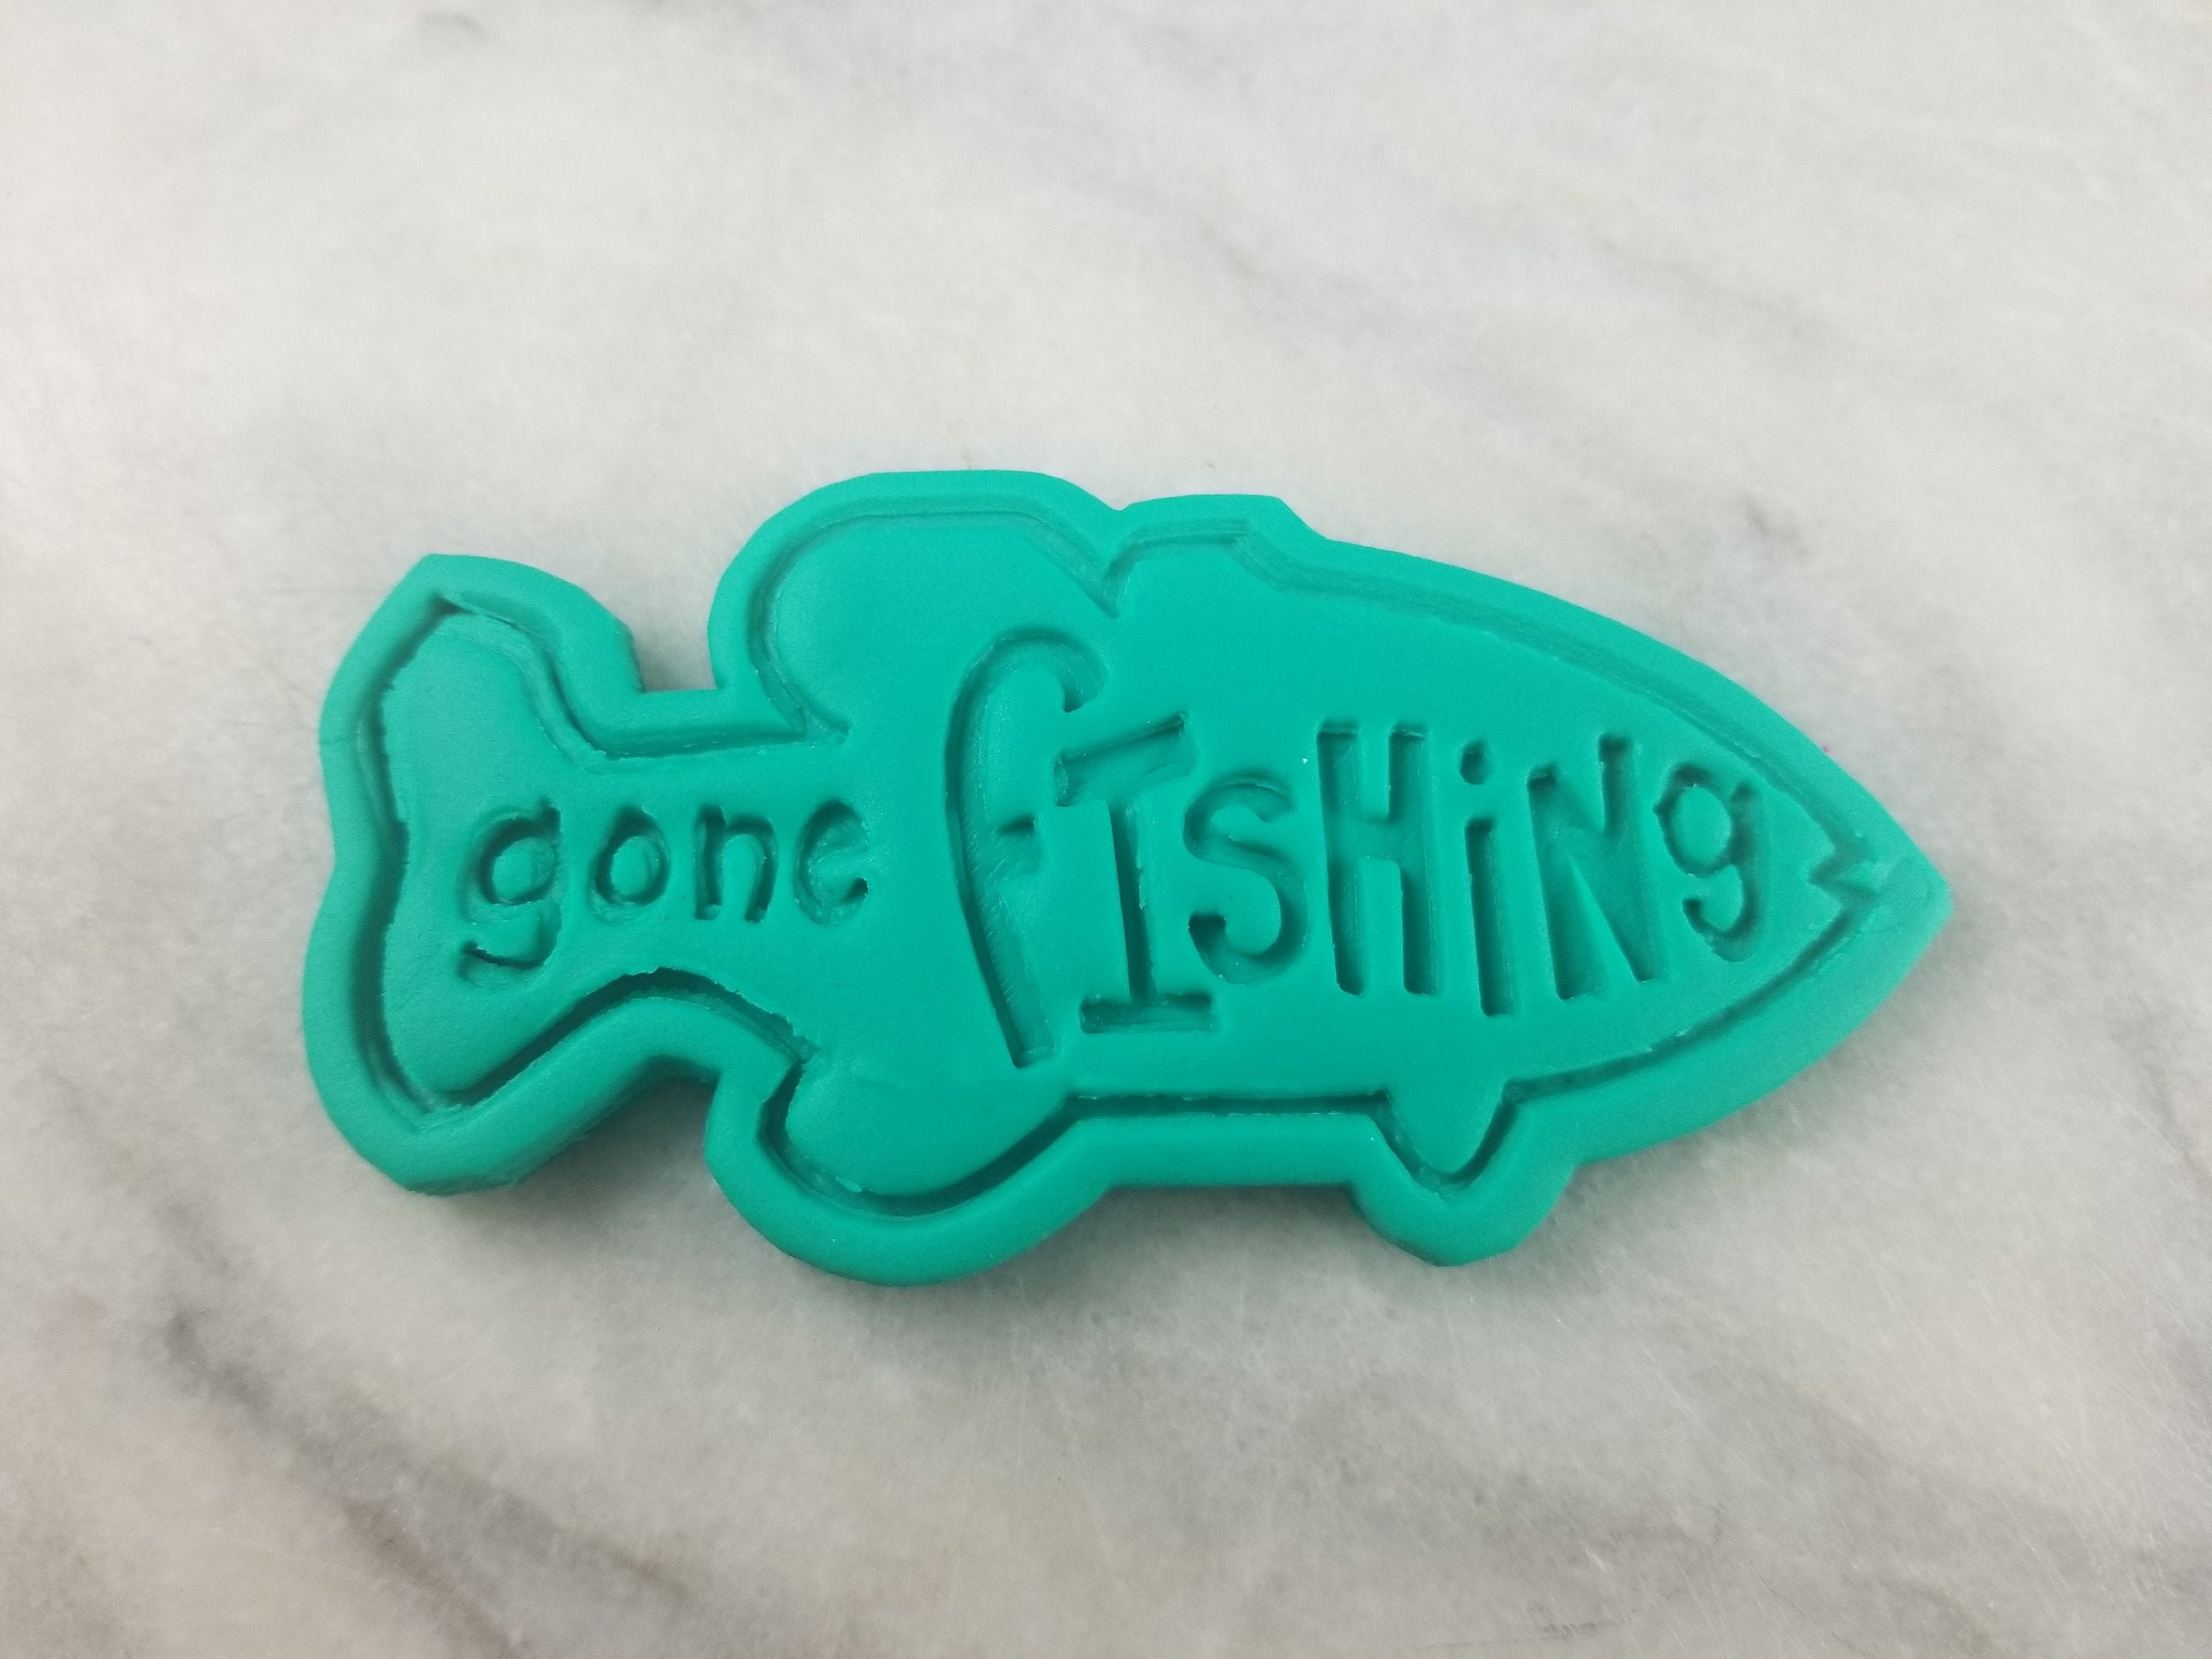 Gone Fishing Cookie Cutter 2-piece, Stamp & Outline 1 SHARP EDGES